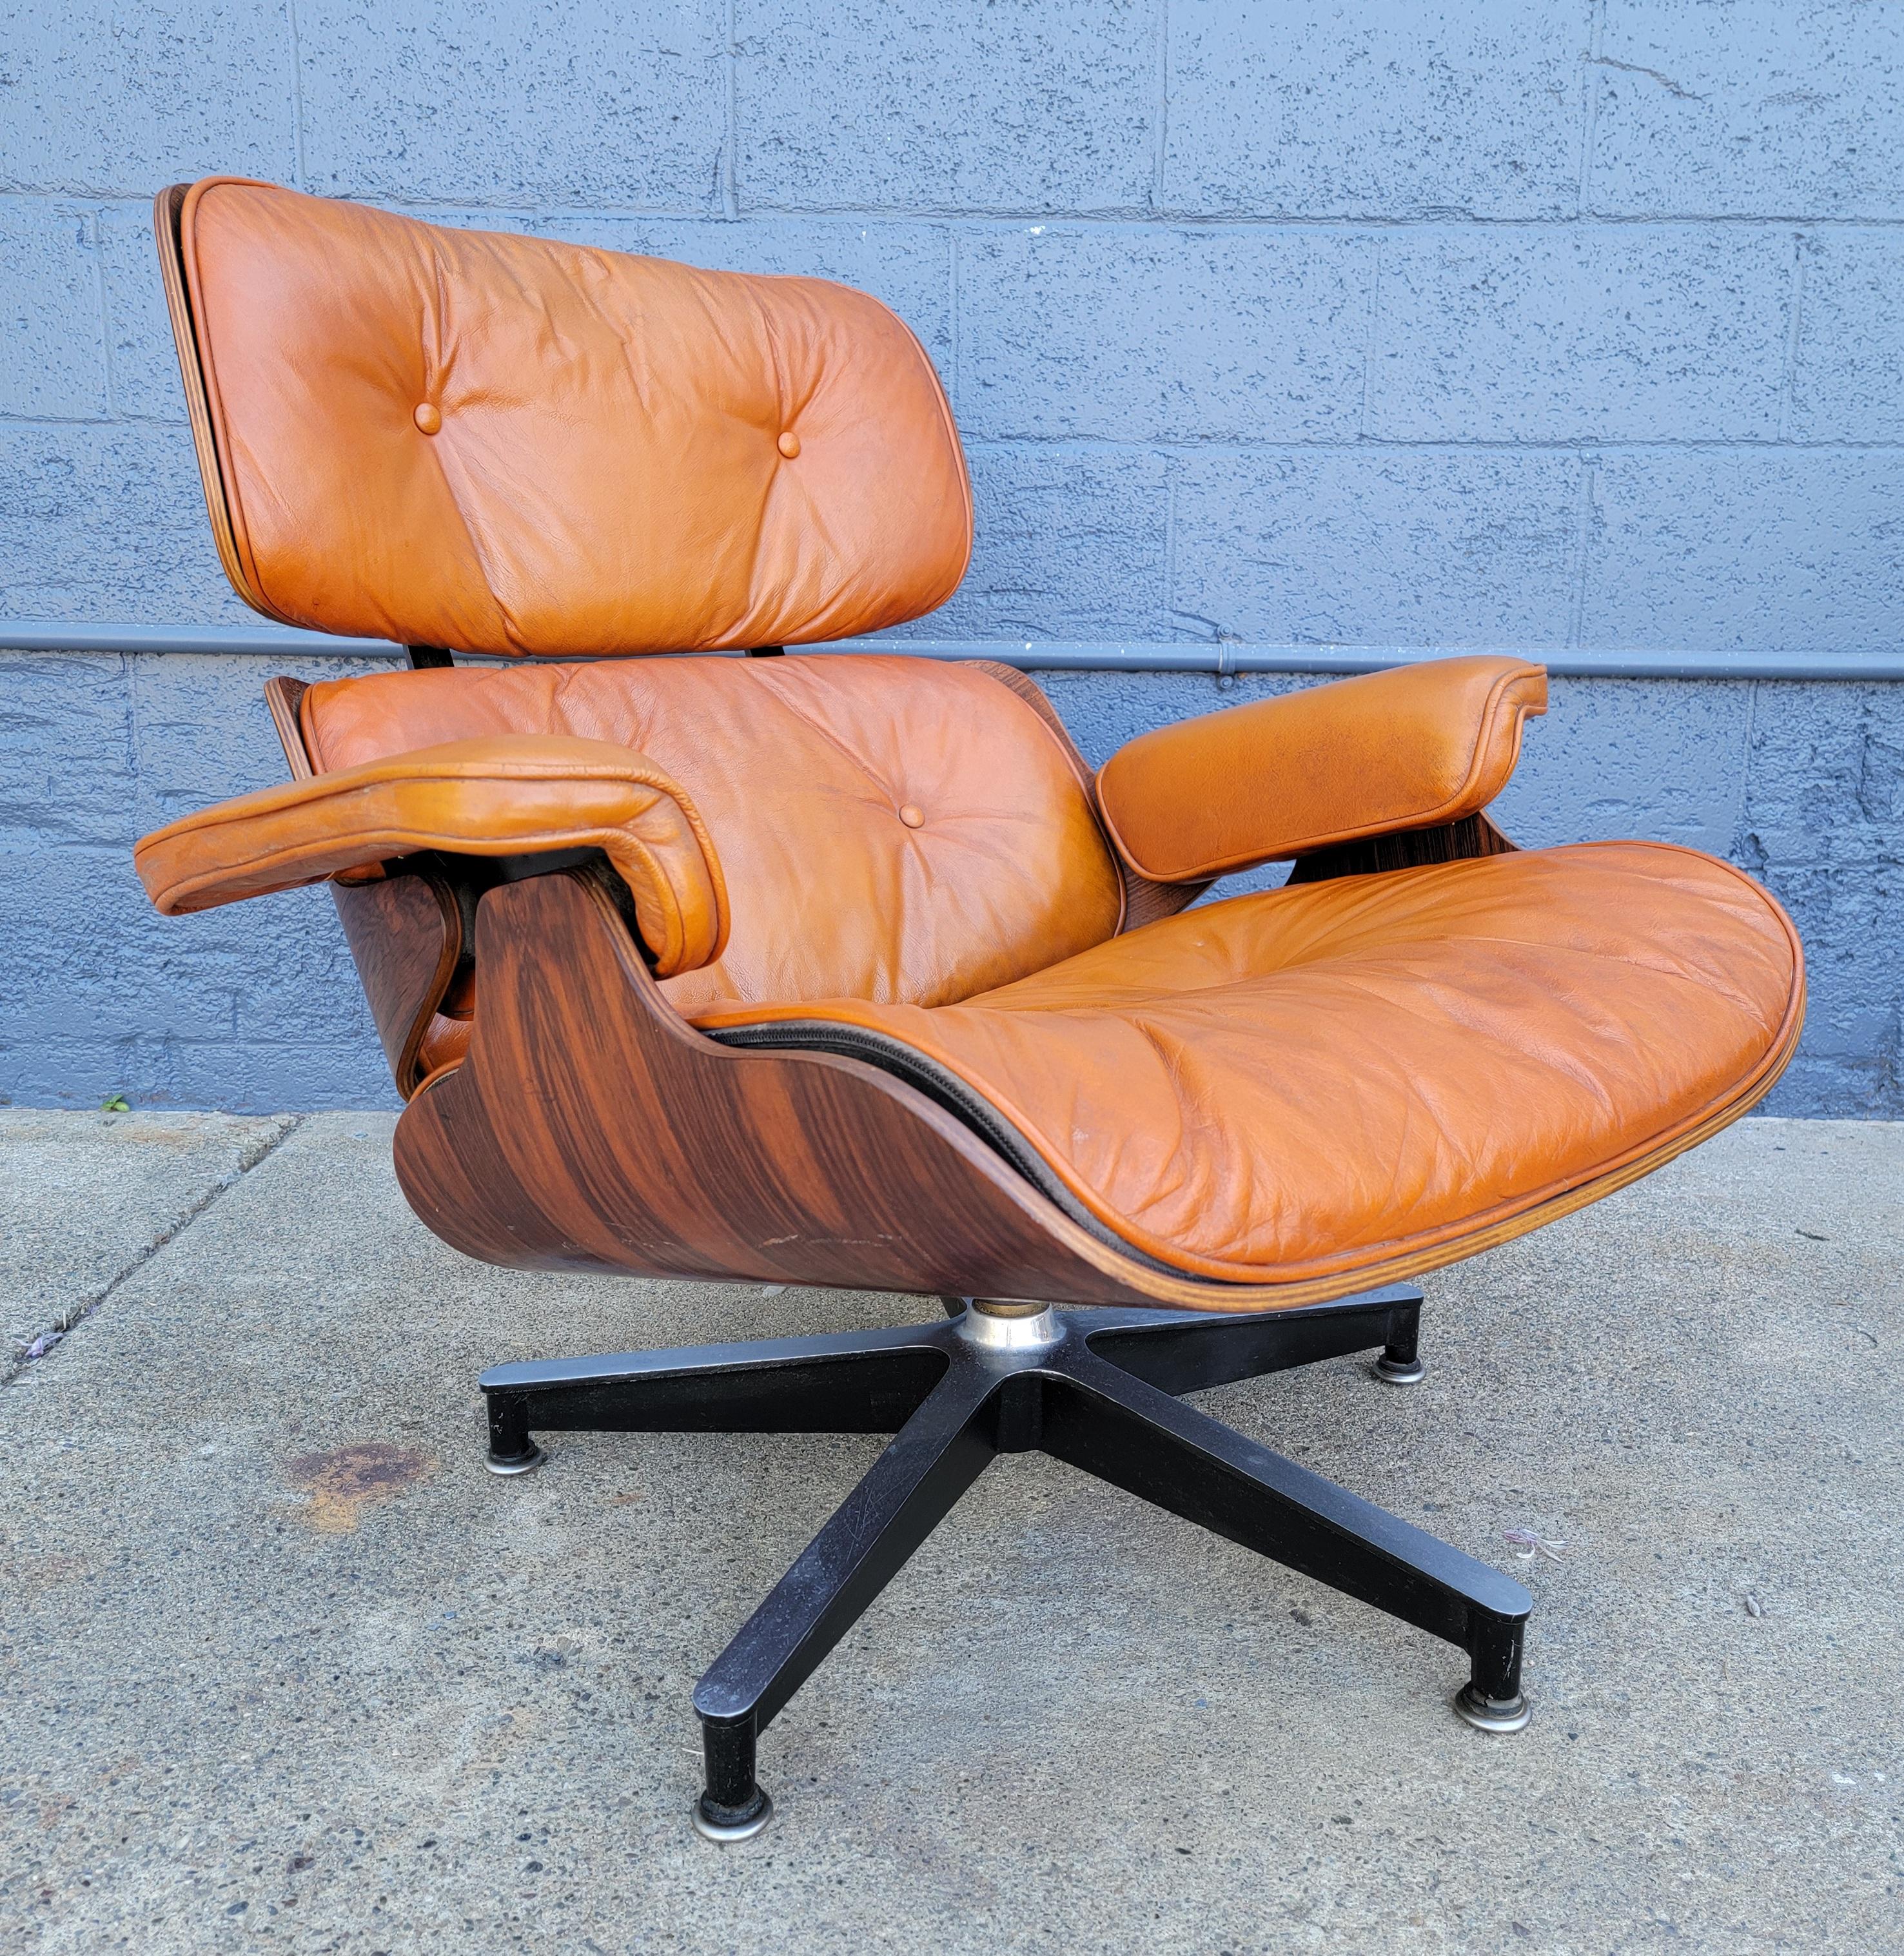 Charles & Ray Eames / Herman Miller 670 lounge chair in Rosewood with original caramel leather. Circa. 1960's. Exceptional figured wood grain with book-matched back panels. Down & foam filled cushions, original glides. Very good original vintage